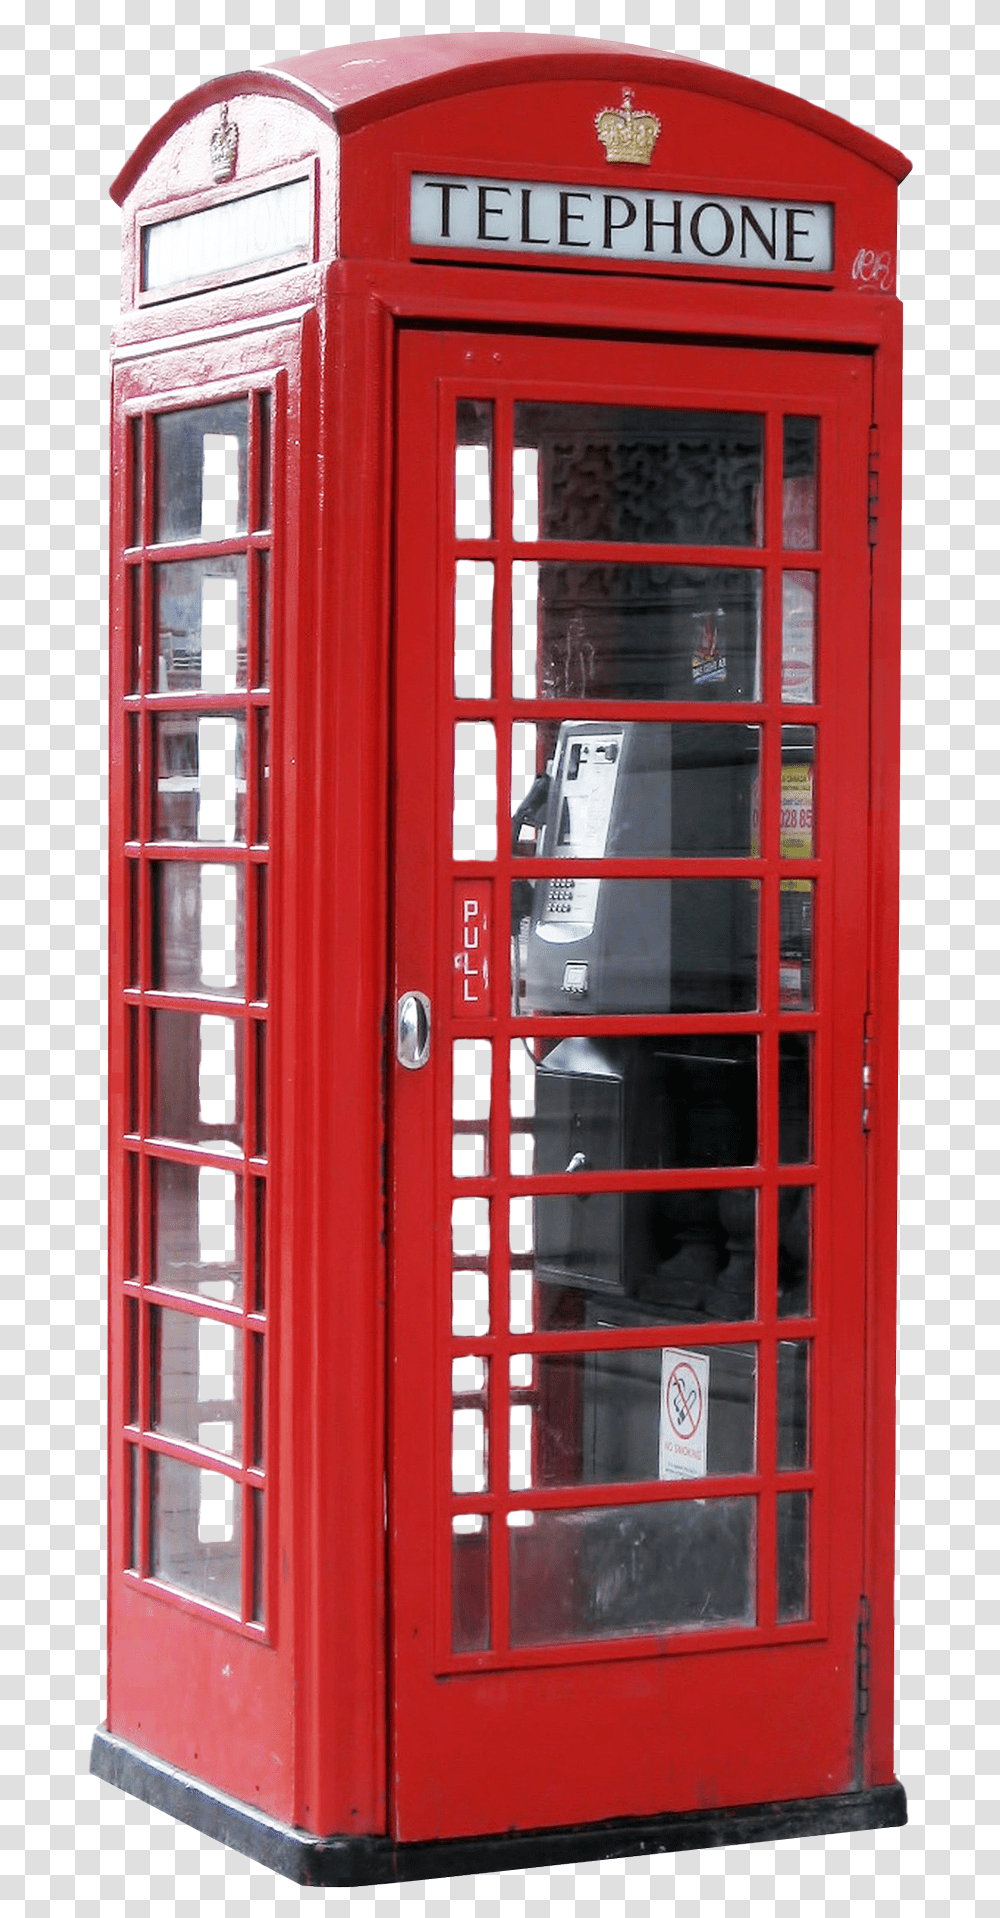 Telephone Booth Image Phone London Telephone Booth, Door, Kiosk, Gas Pump, Machine Transparent Png